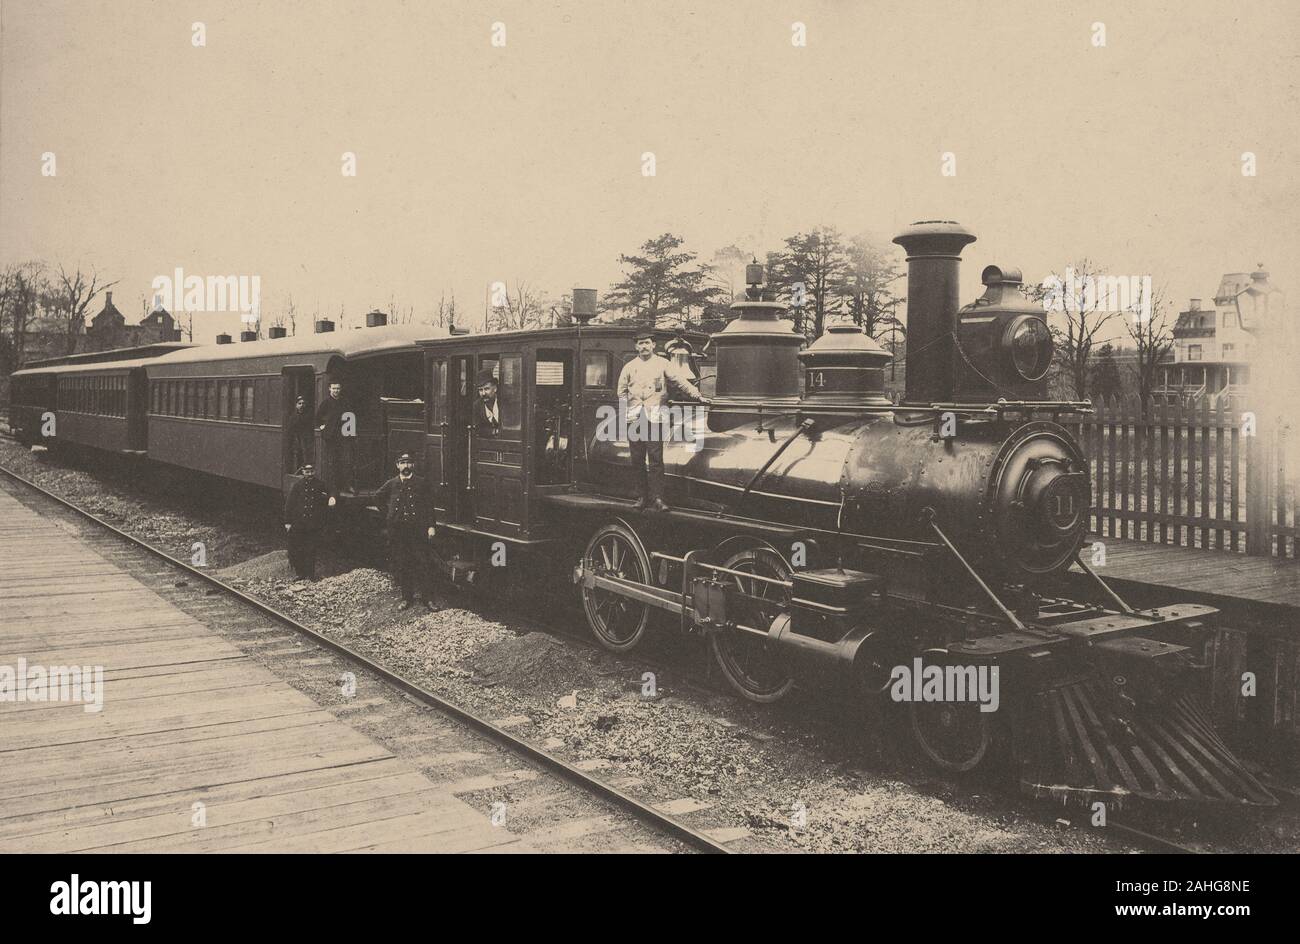 Antique c 1890 photograph, “train and crew on the Staten Island Rapid Transit” with engine number 14. SOURCE: ORIGINAL CYANOTYPE PHOTOGRAPH Stock Photo